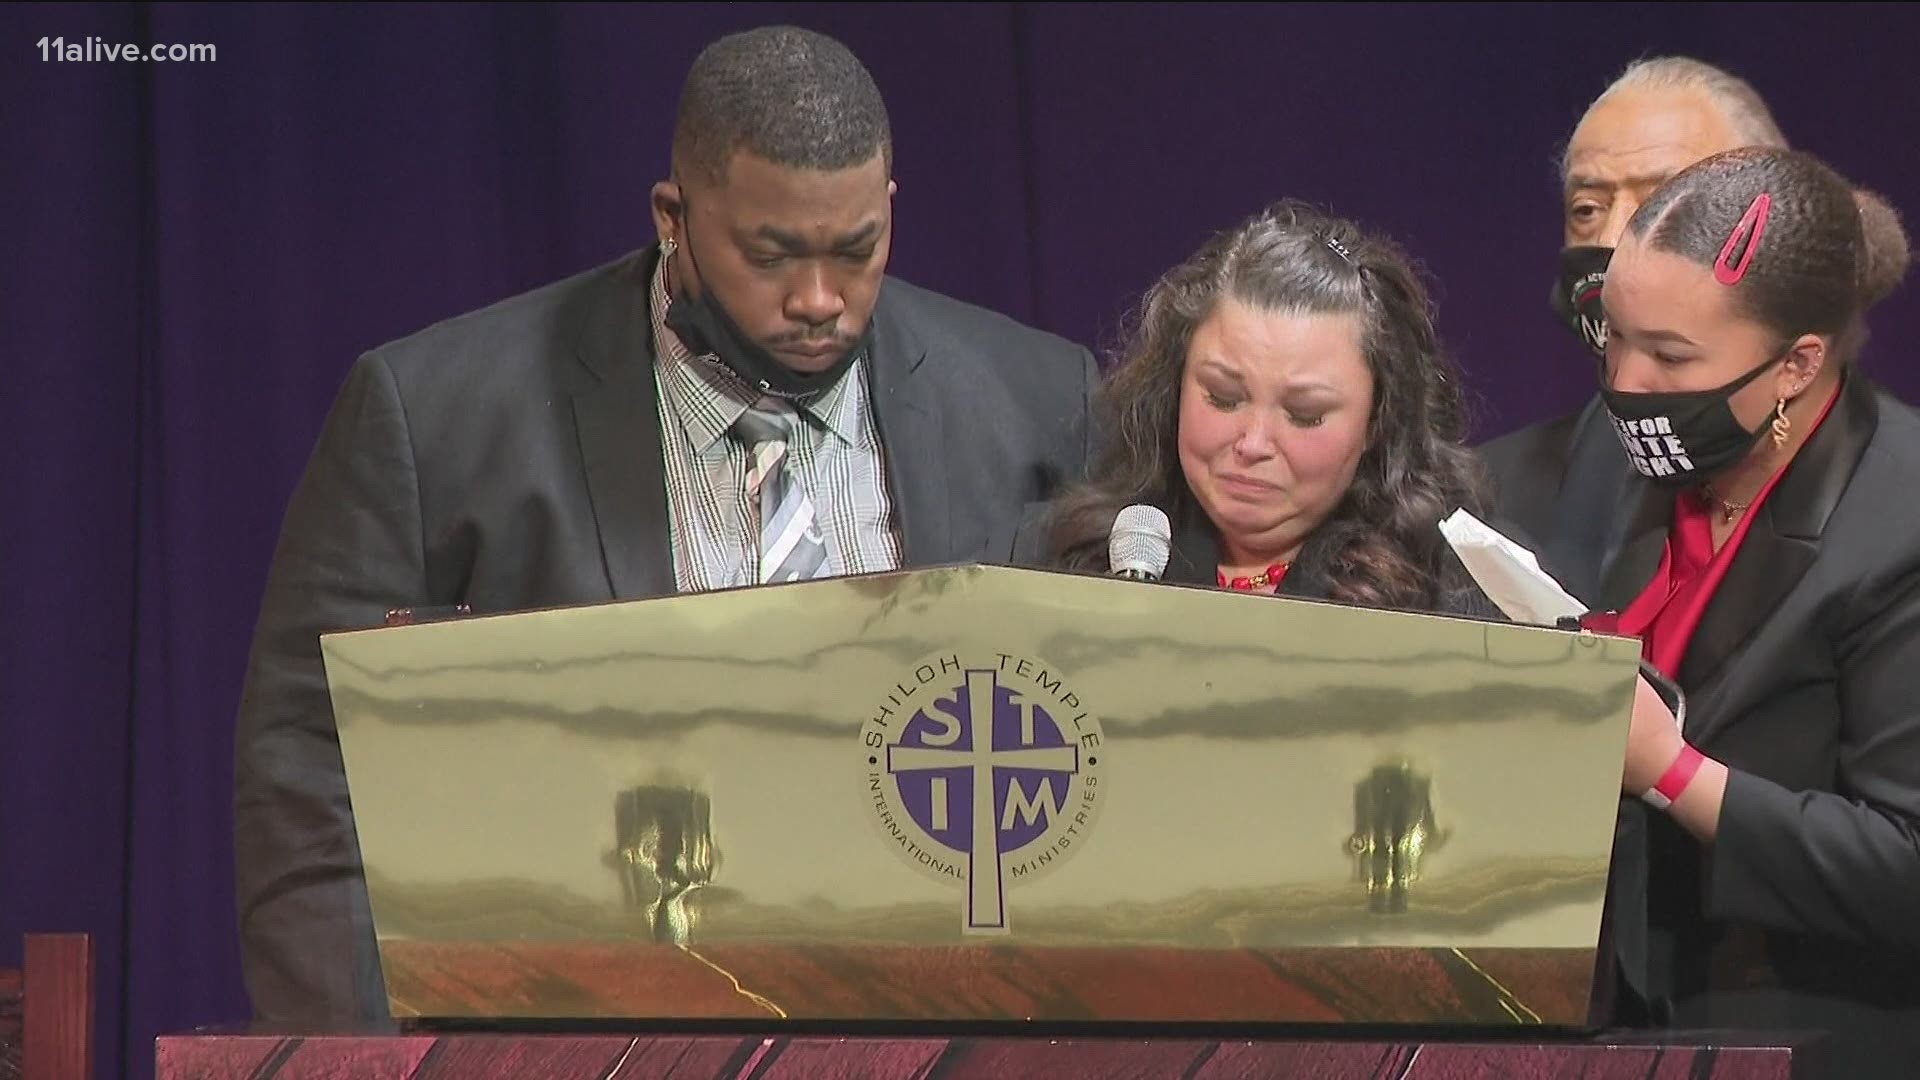 Daunte Wright's mother spoke at the funeral, where Rev. Al Sharpton delivered the eulogy.